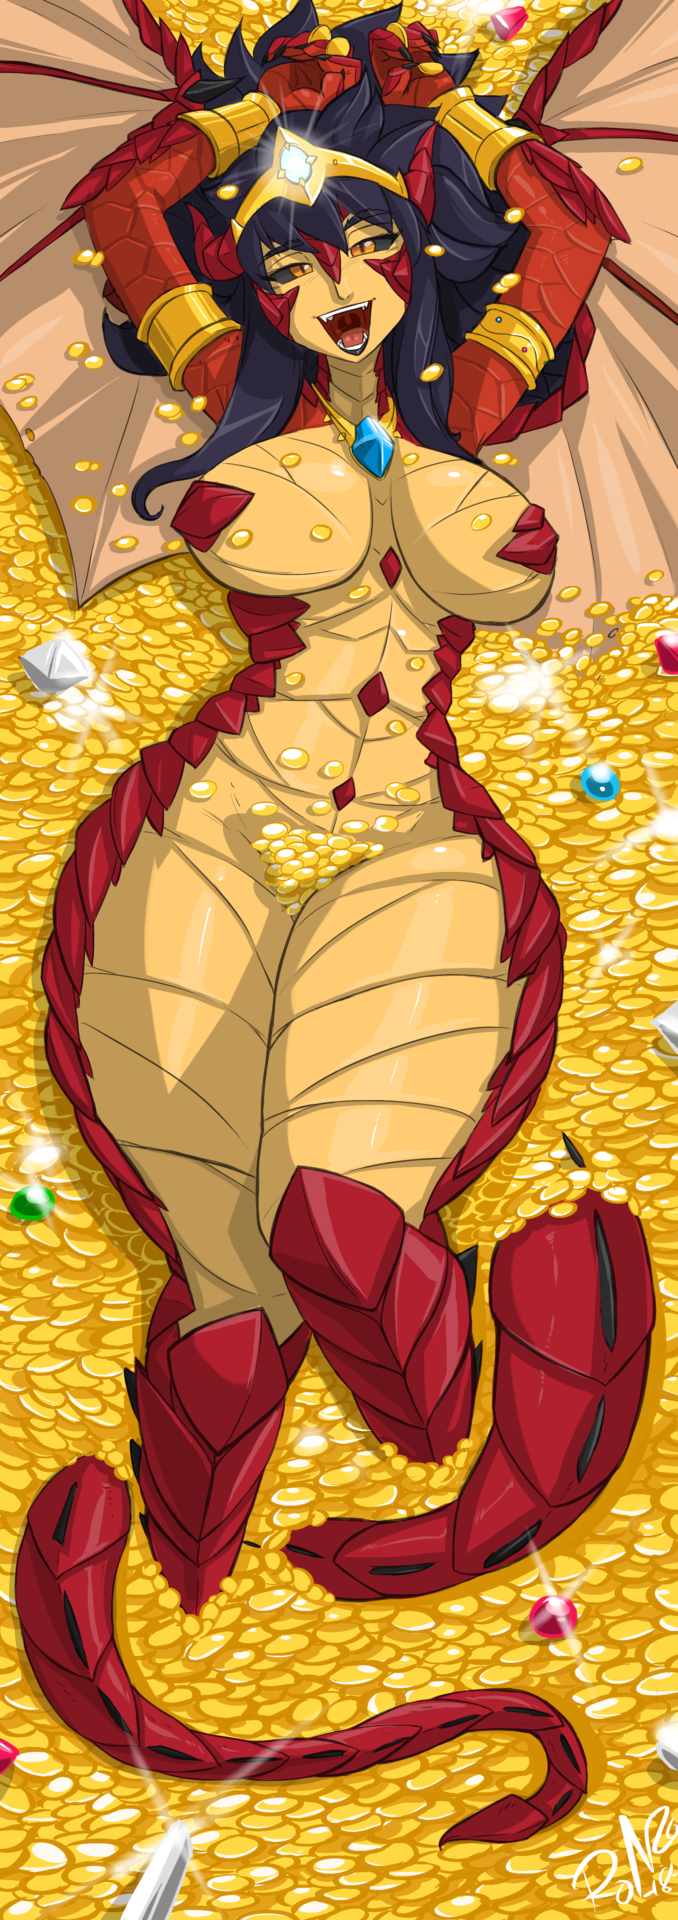 shonuff44:   I was going for a Dakimakura pillow style with this one. This one took